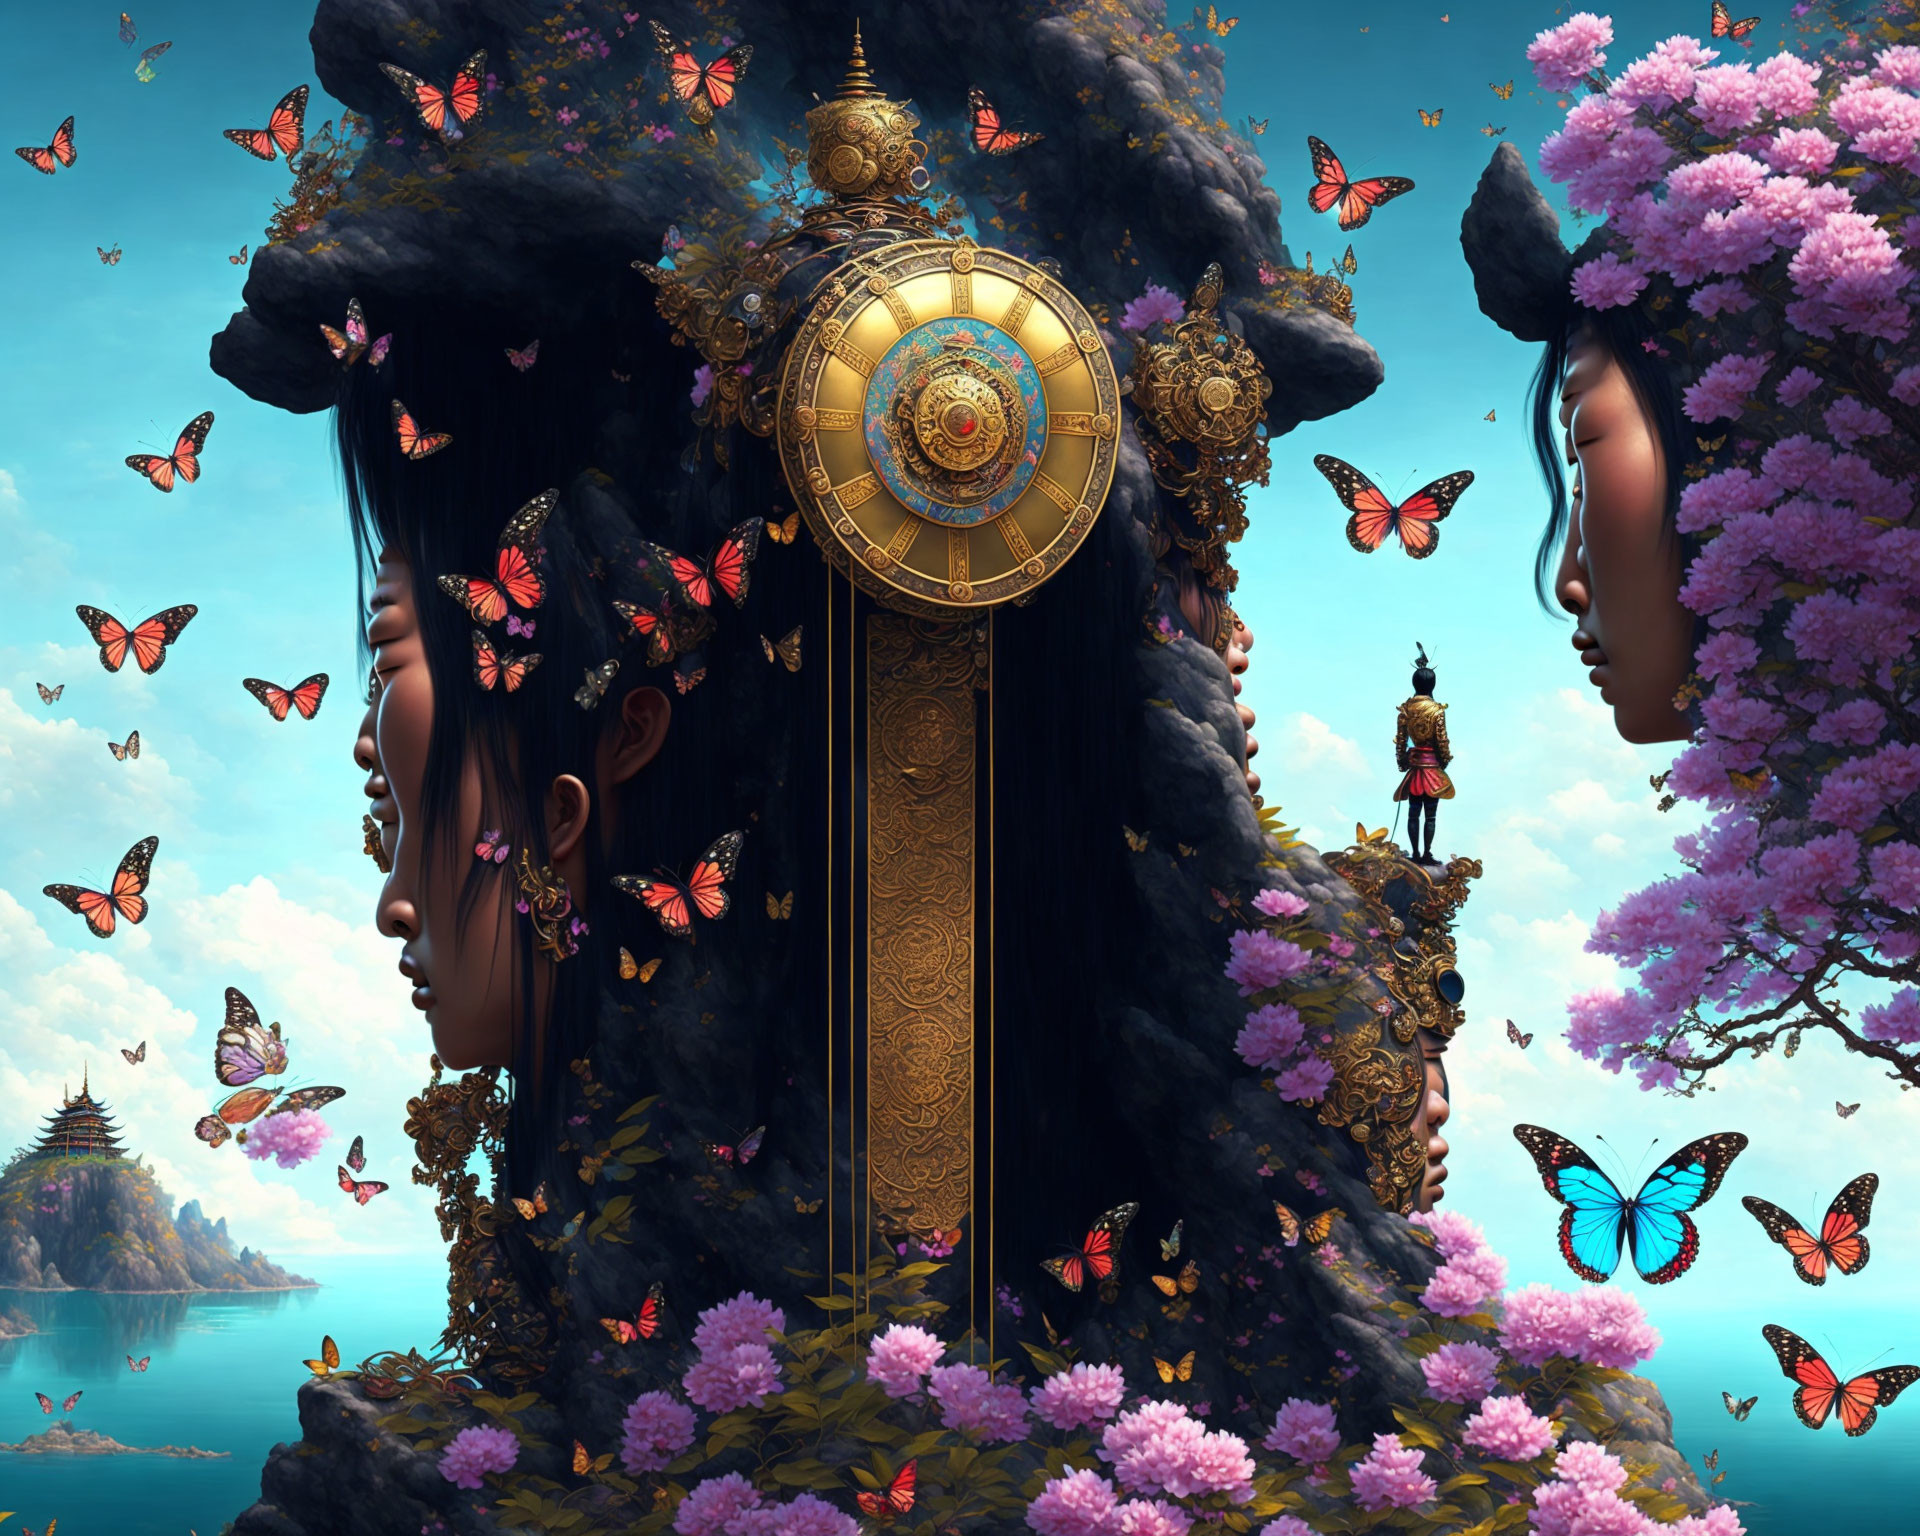 Fantastical profile faces with flora, butterflies, golden clock, and figure in serene sky